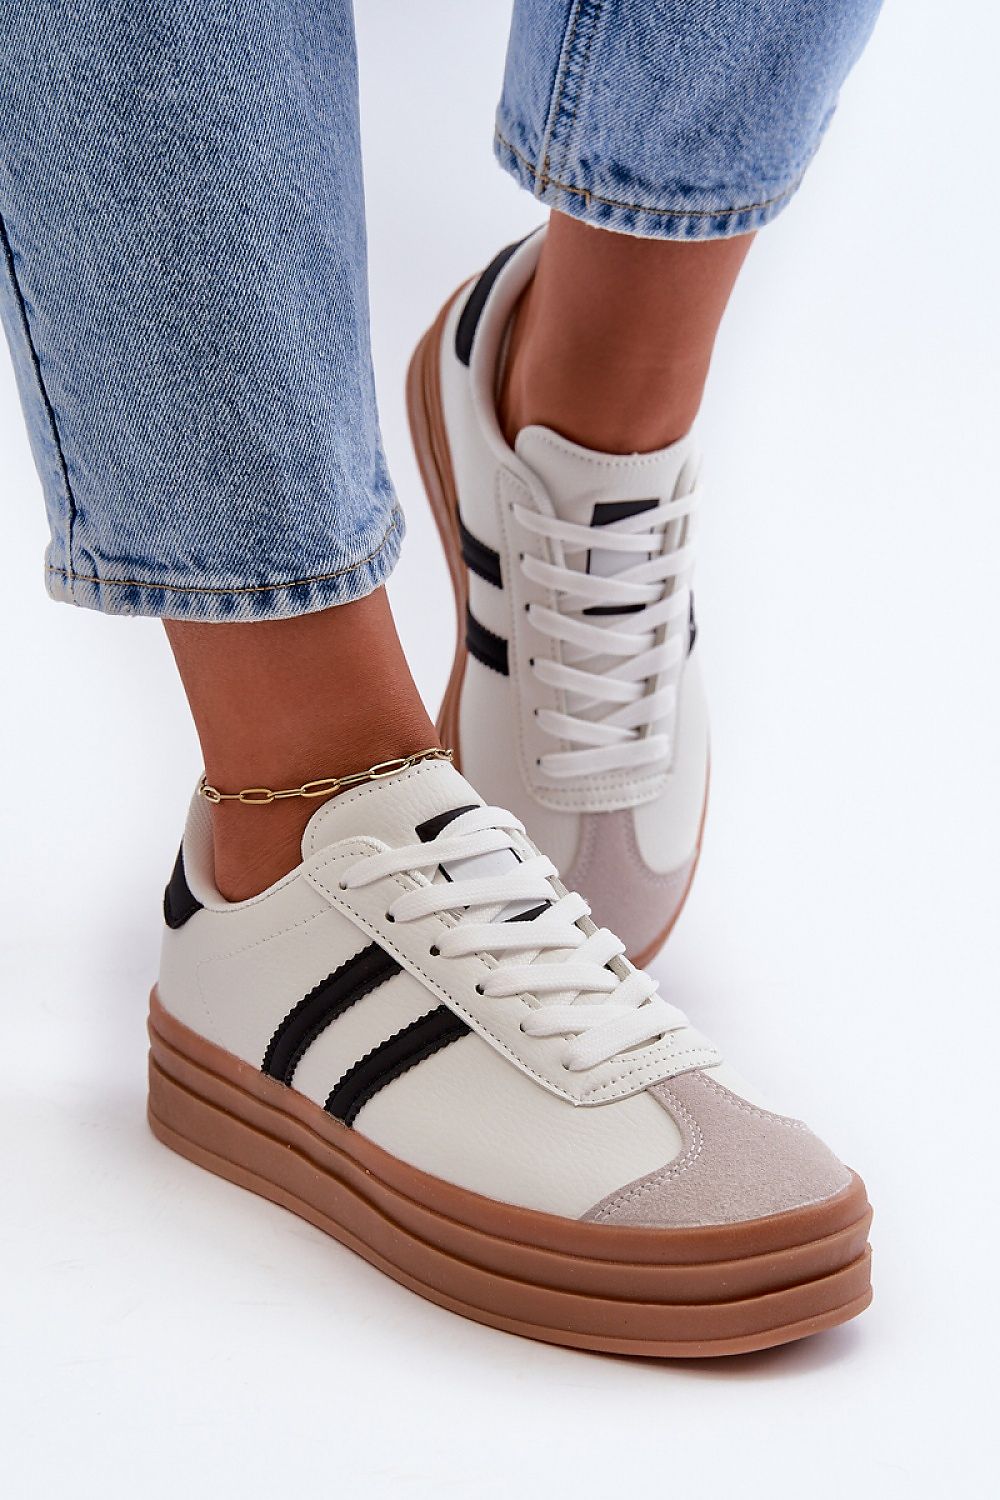 Sport Shoes model 198512 Step in style